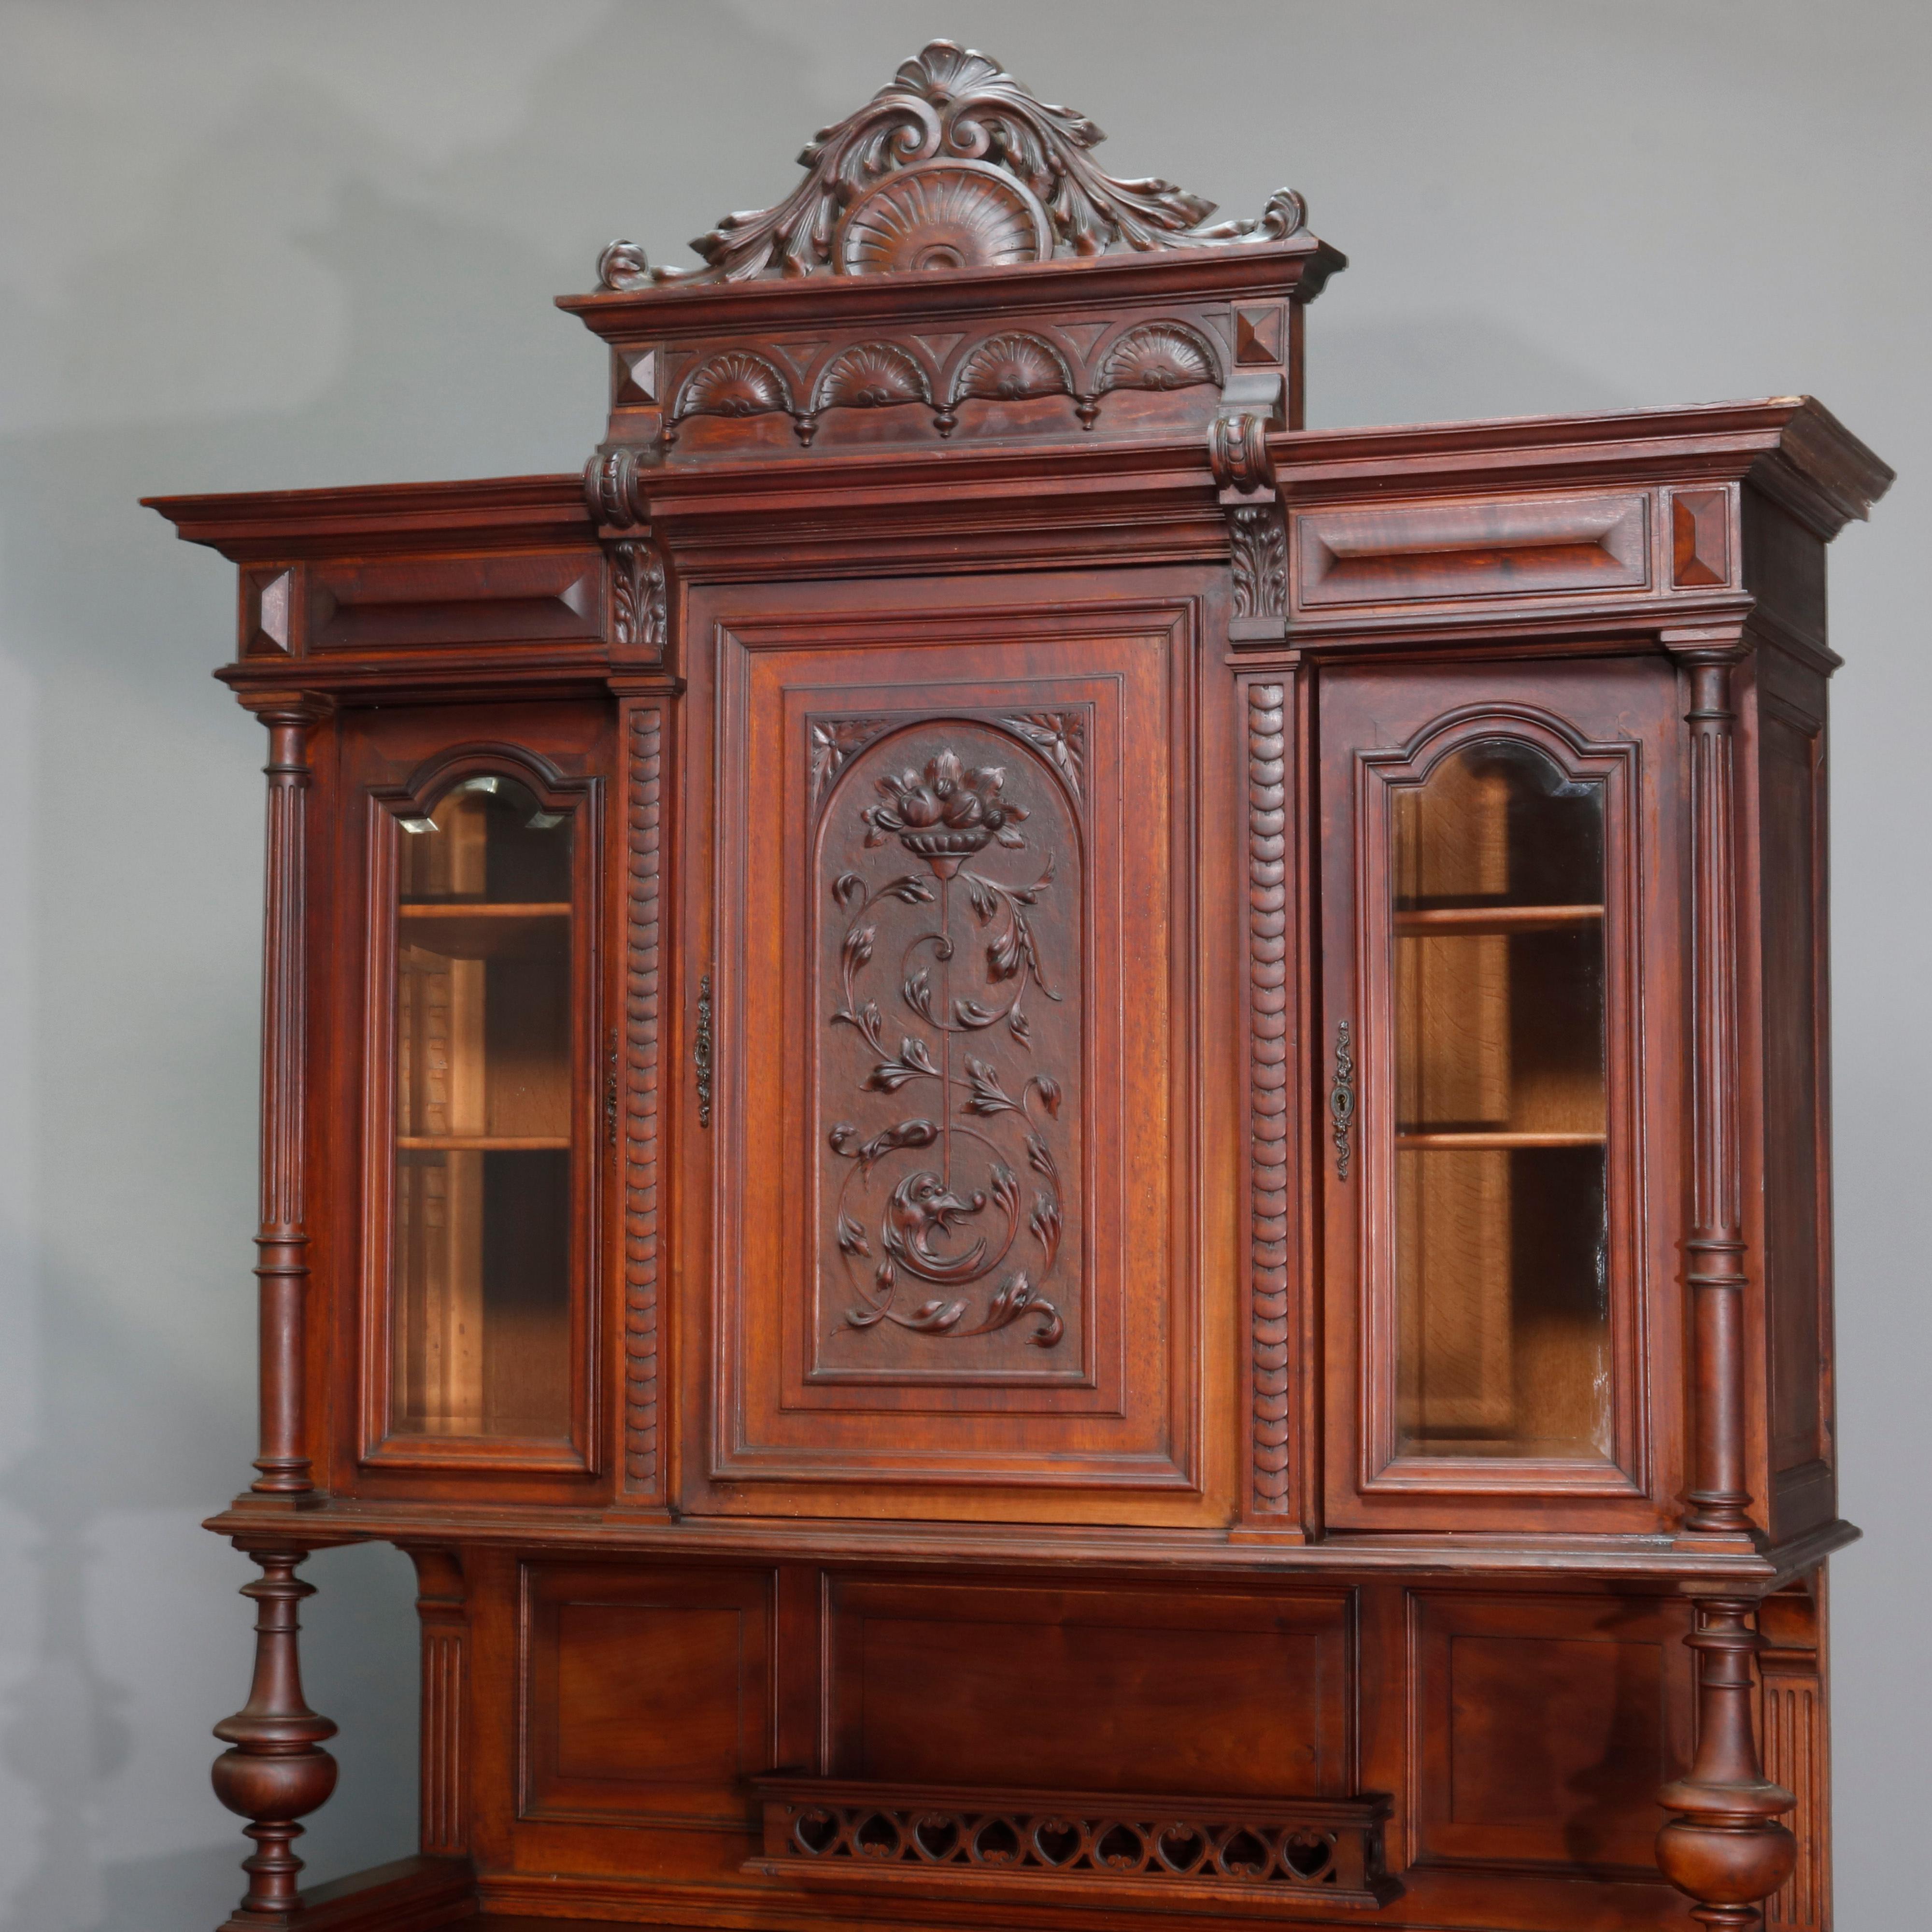 Antique oversized French Renaissance carved walnut cupboard with exaggerated crest having acanthus and shell, surmounting triple door cabinet with carved central panel with dolphin, foliate, scroll and fruit urn with flanking arched beveled glass